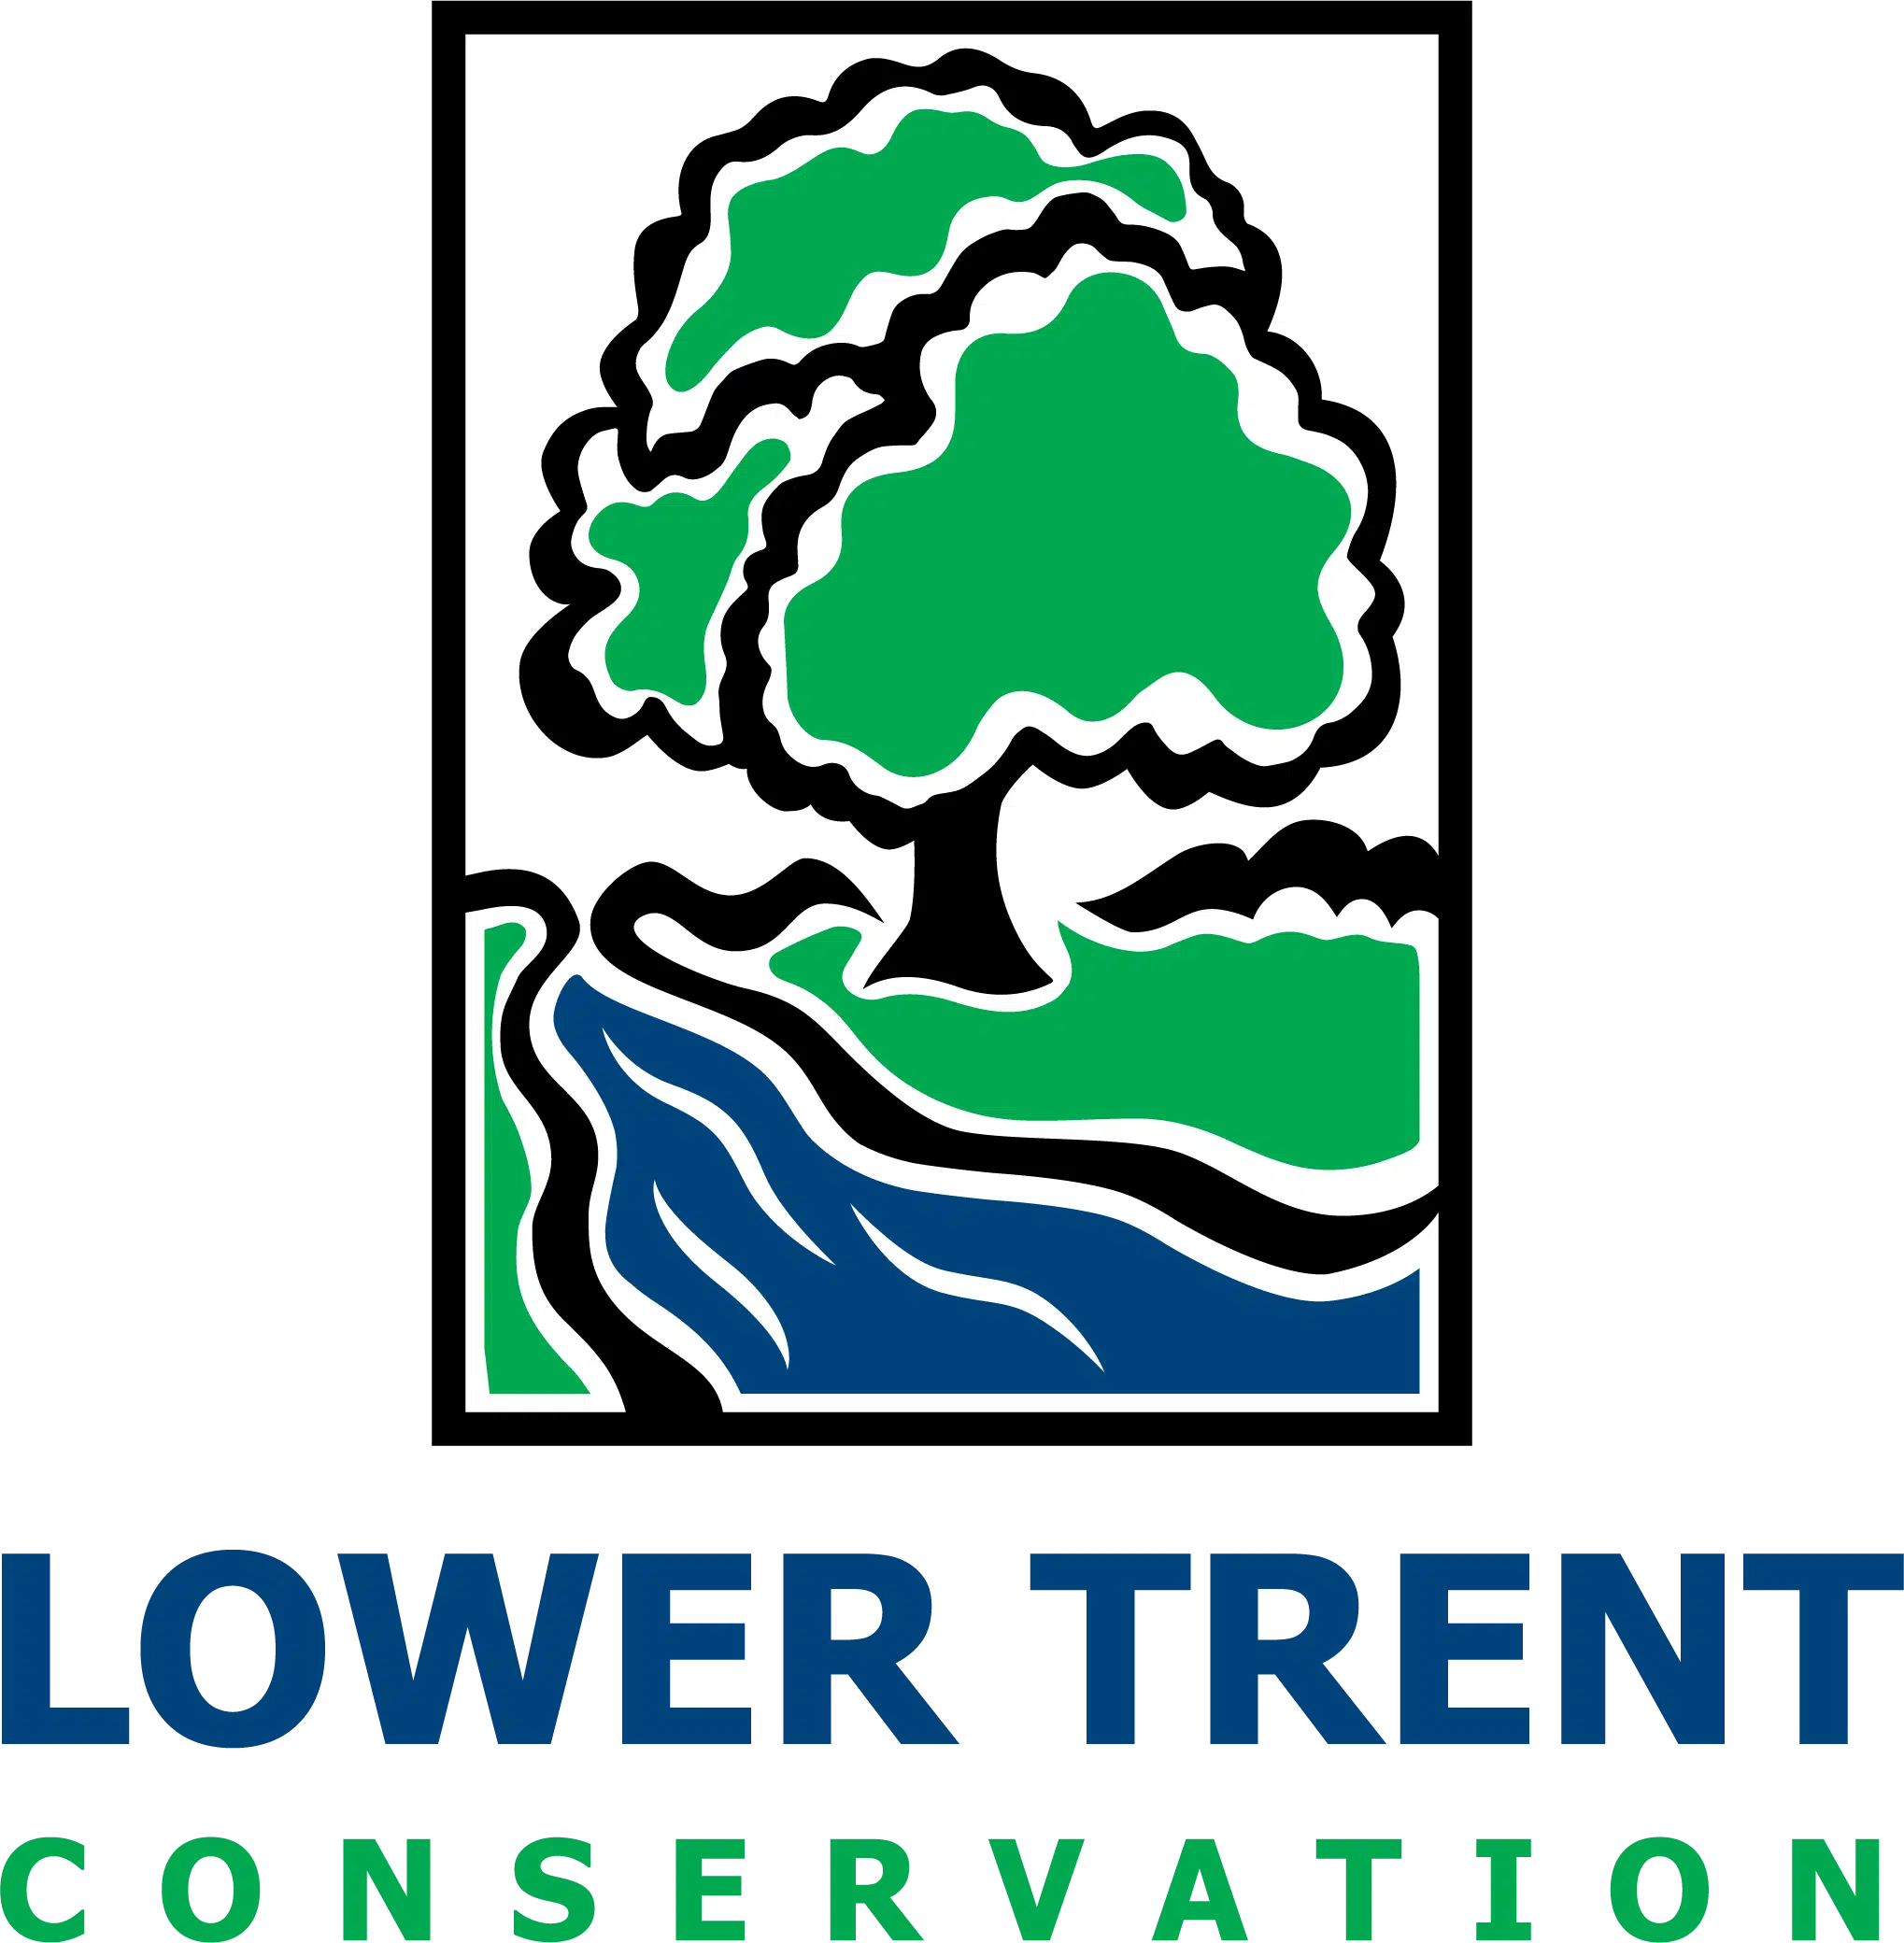 Flood Warning issued by Lower Trent Conservation